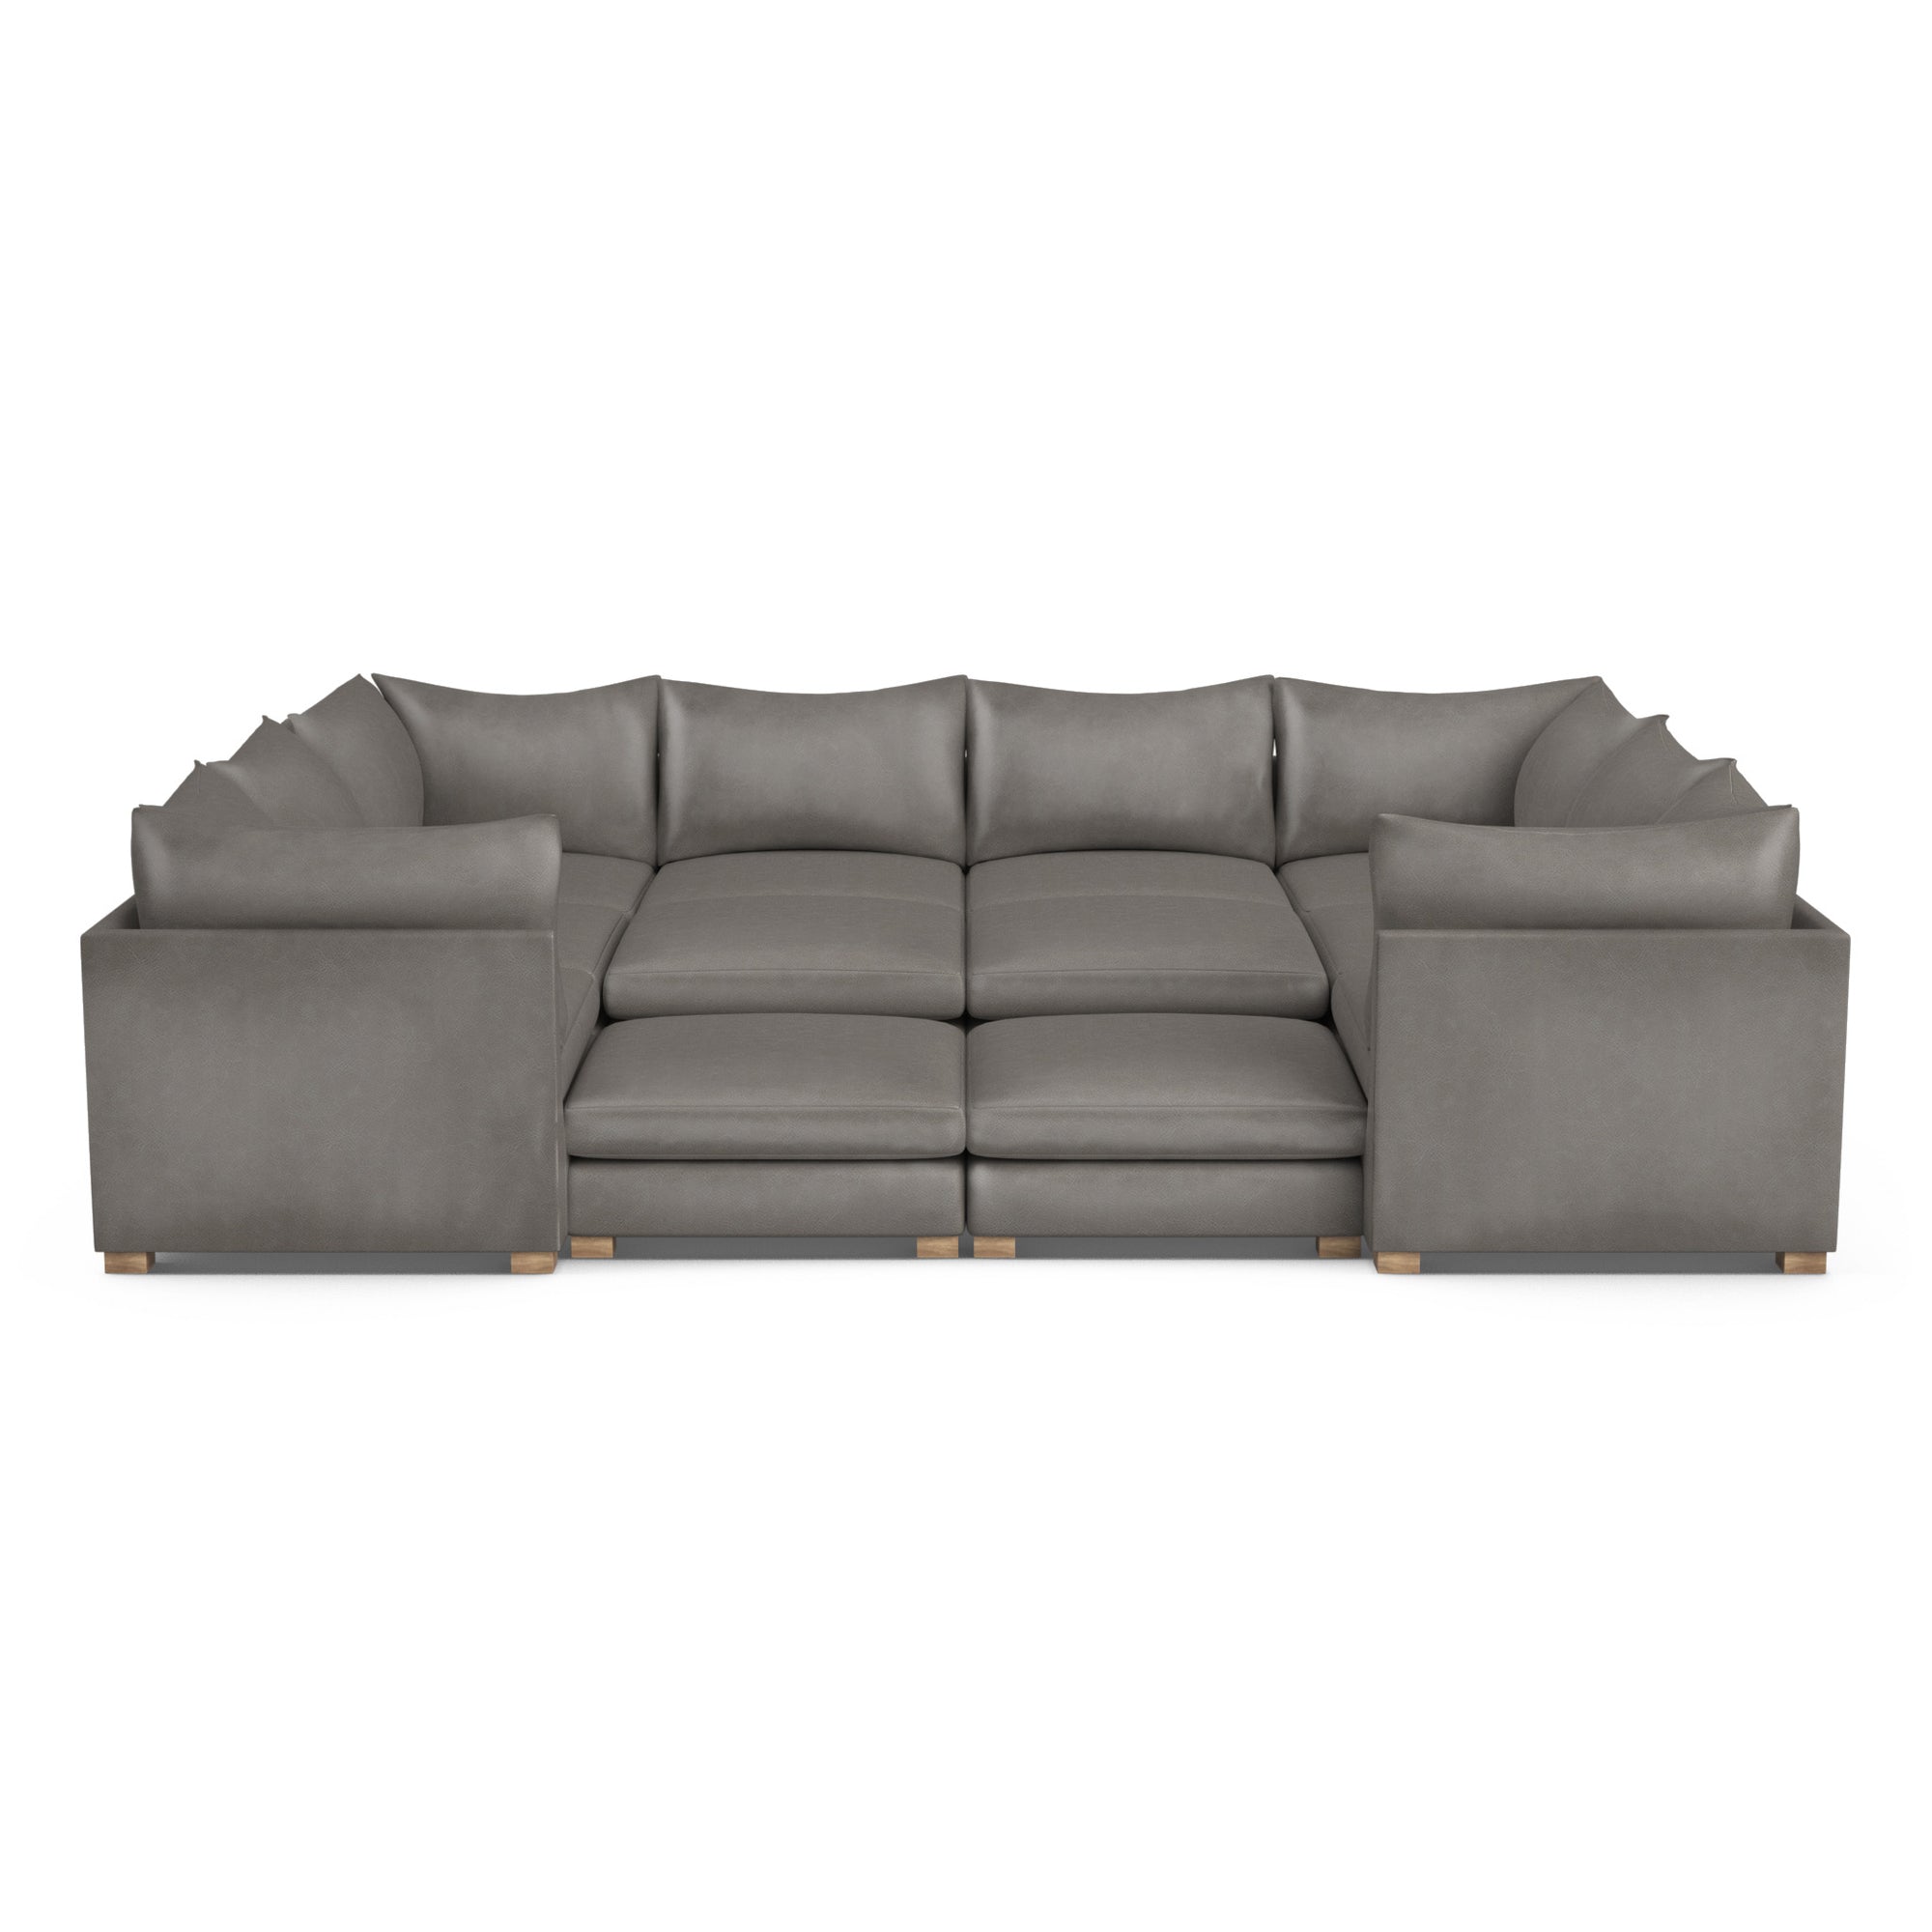 Evans 12-Piece Total-Pit Sectional - Pumice Vintage Leather